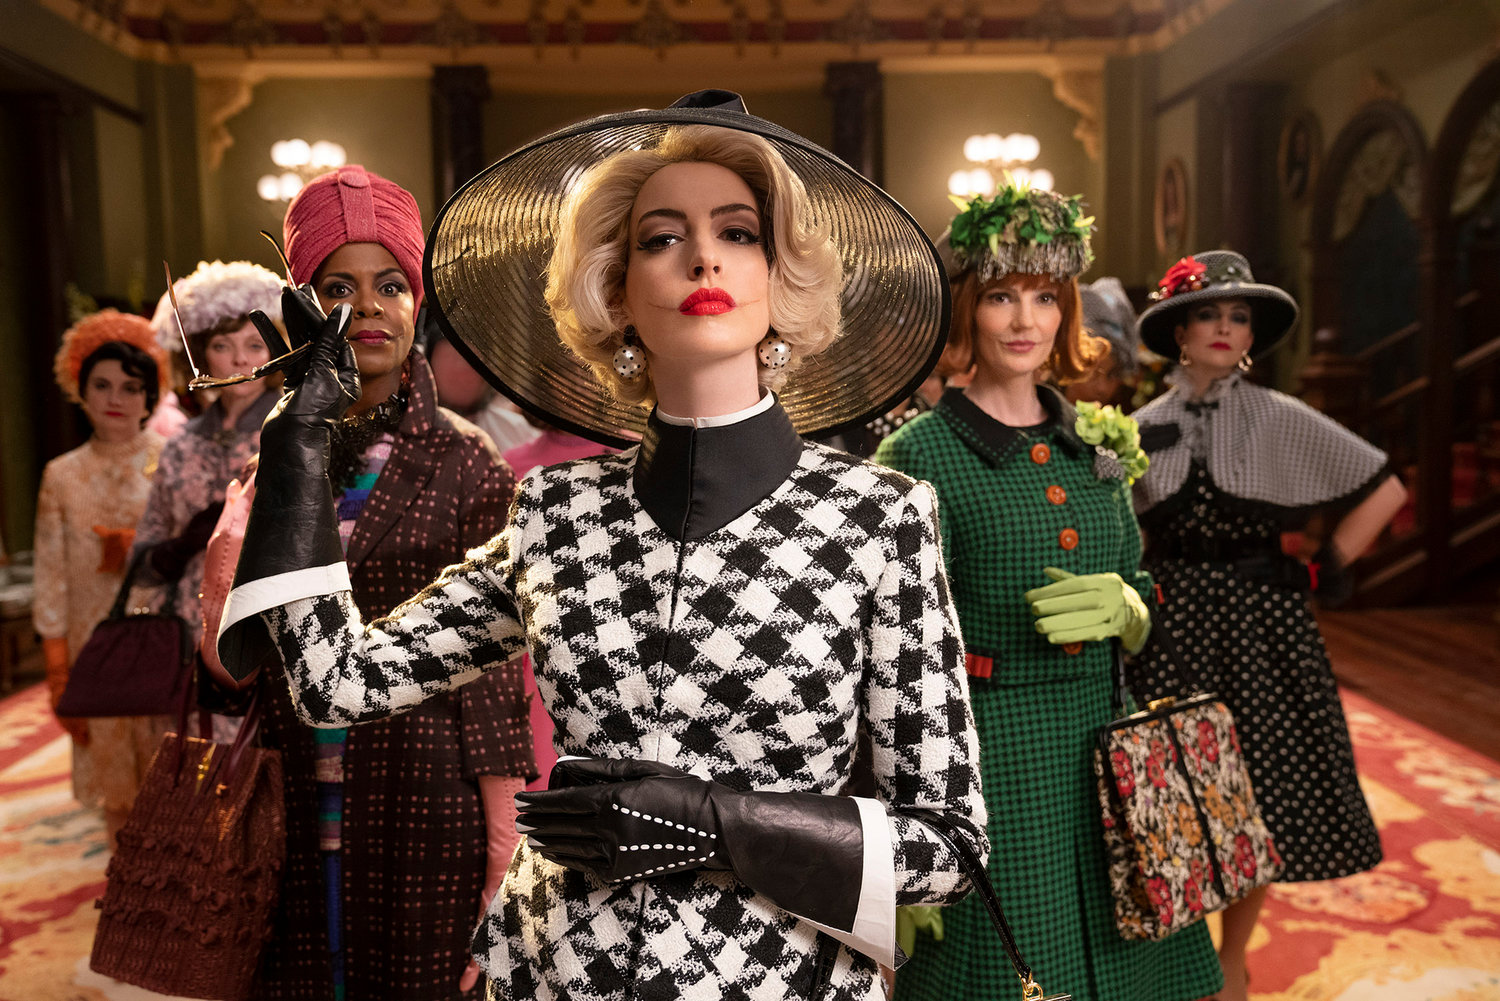 (L-R) Eugenia Caruso, Penny Lisle, Josette Simon, Anne Hathaway, Orla O’Rourke and Ana-Maria Maskell star In “The Witches.”